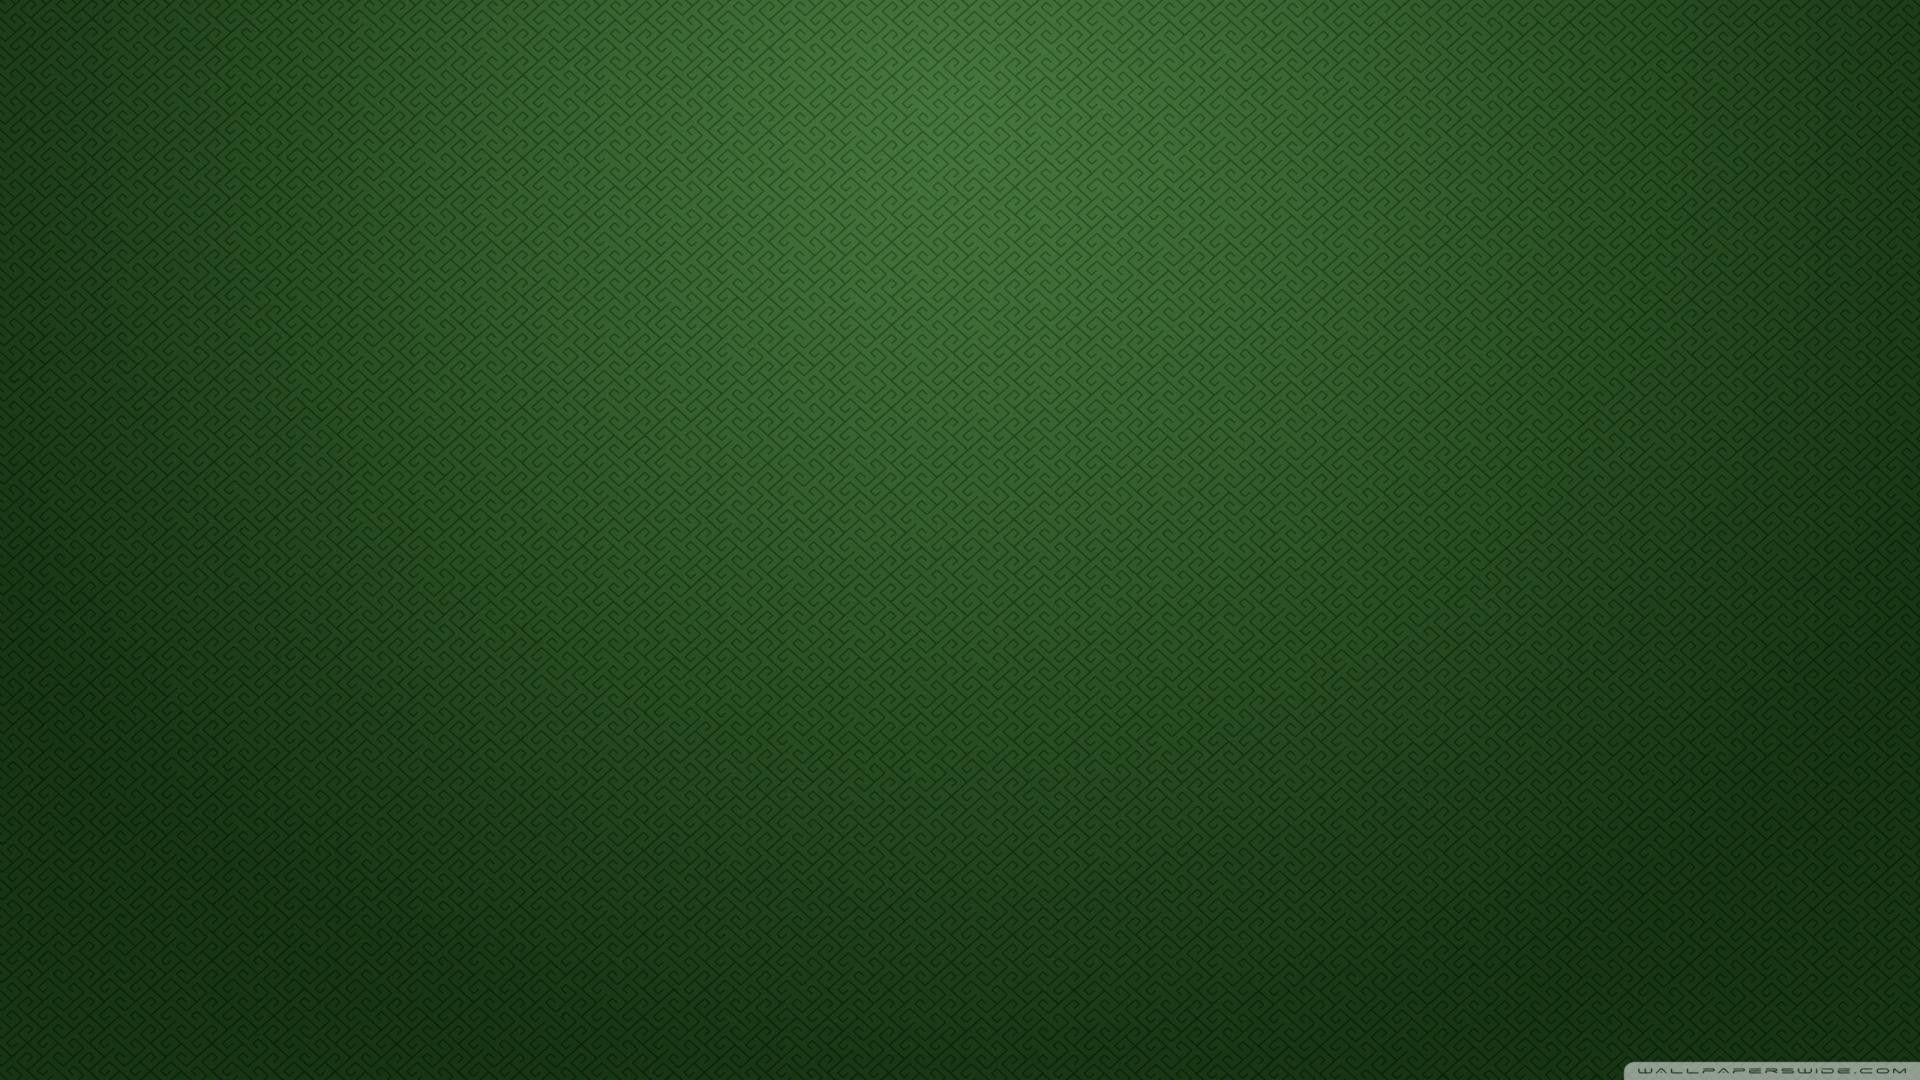 Dark Green Background Images HD Pictures and Wallpaper For Free Download   Pngtree